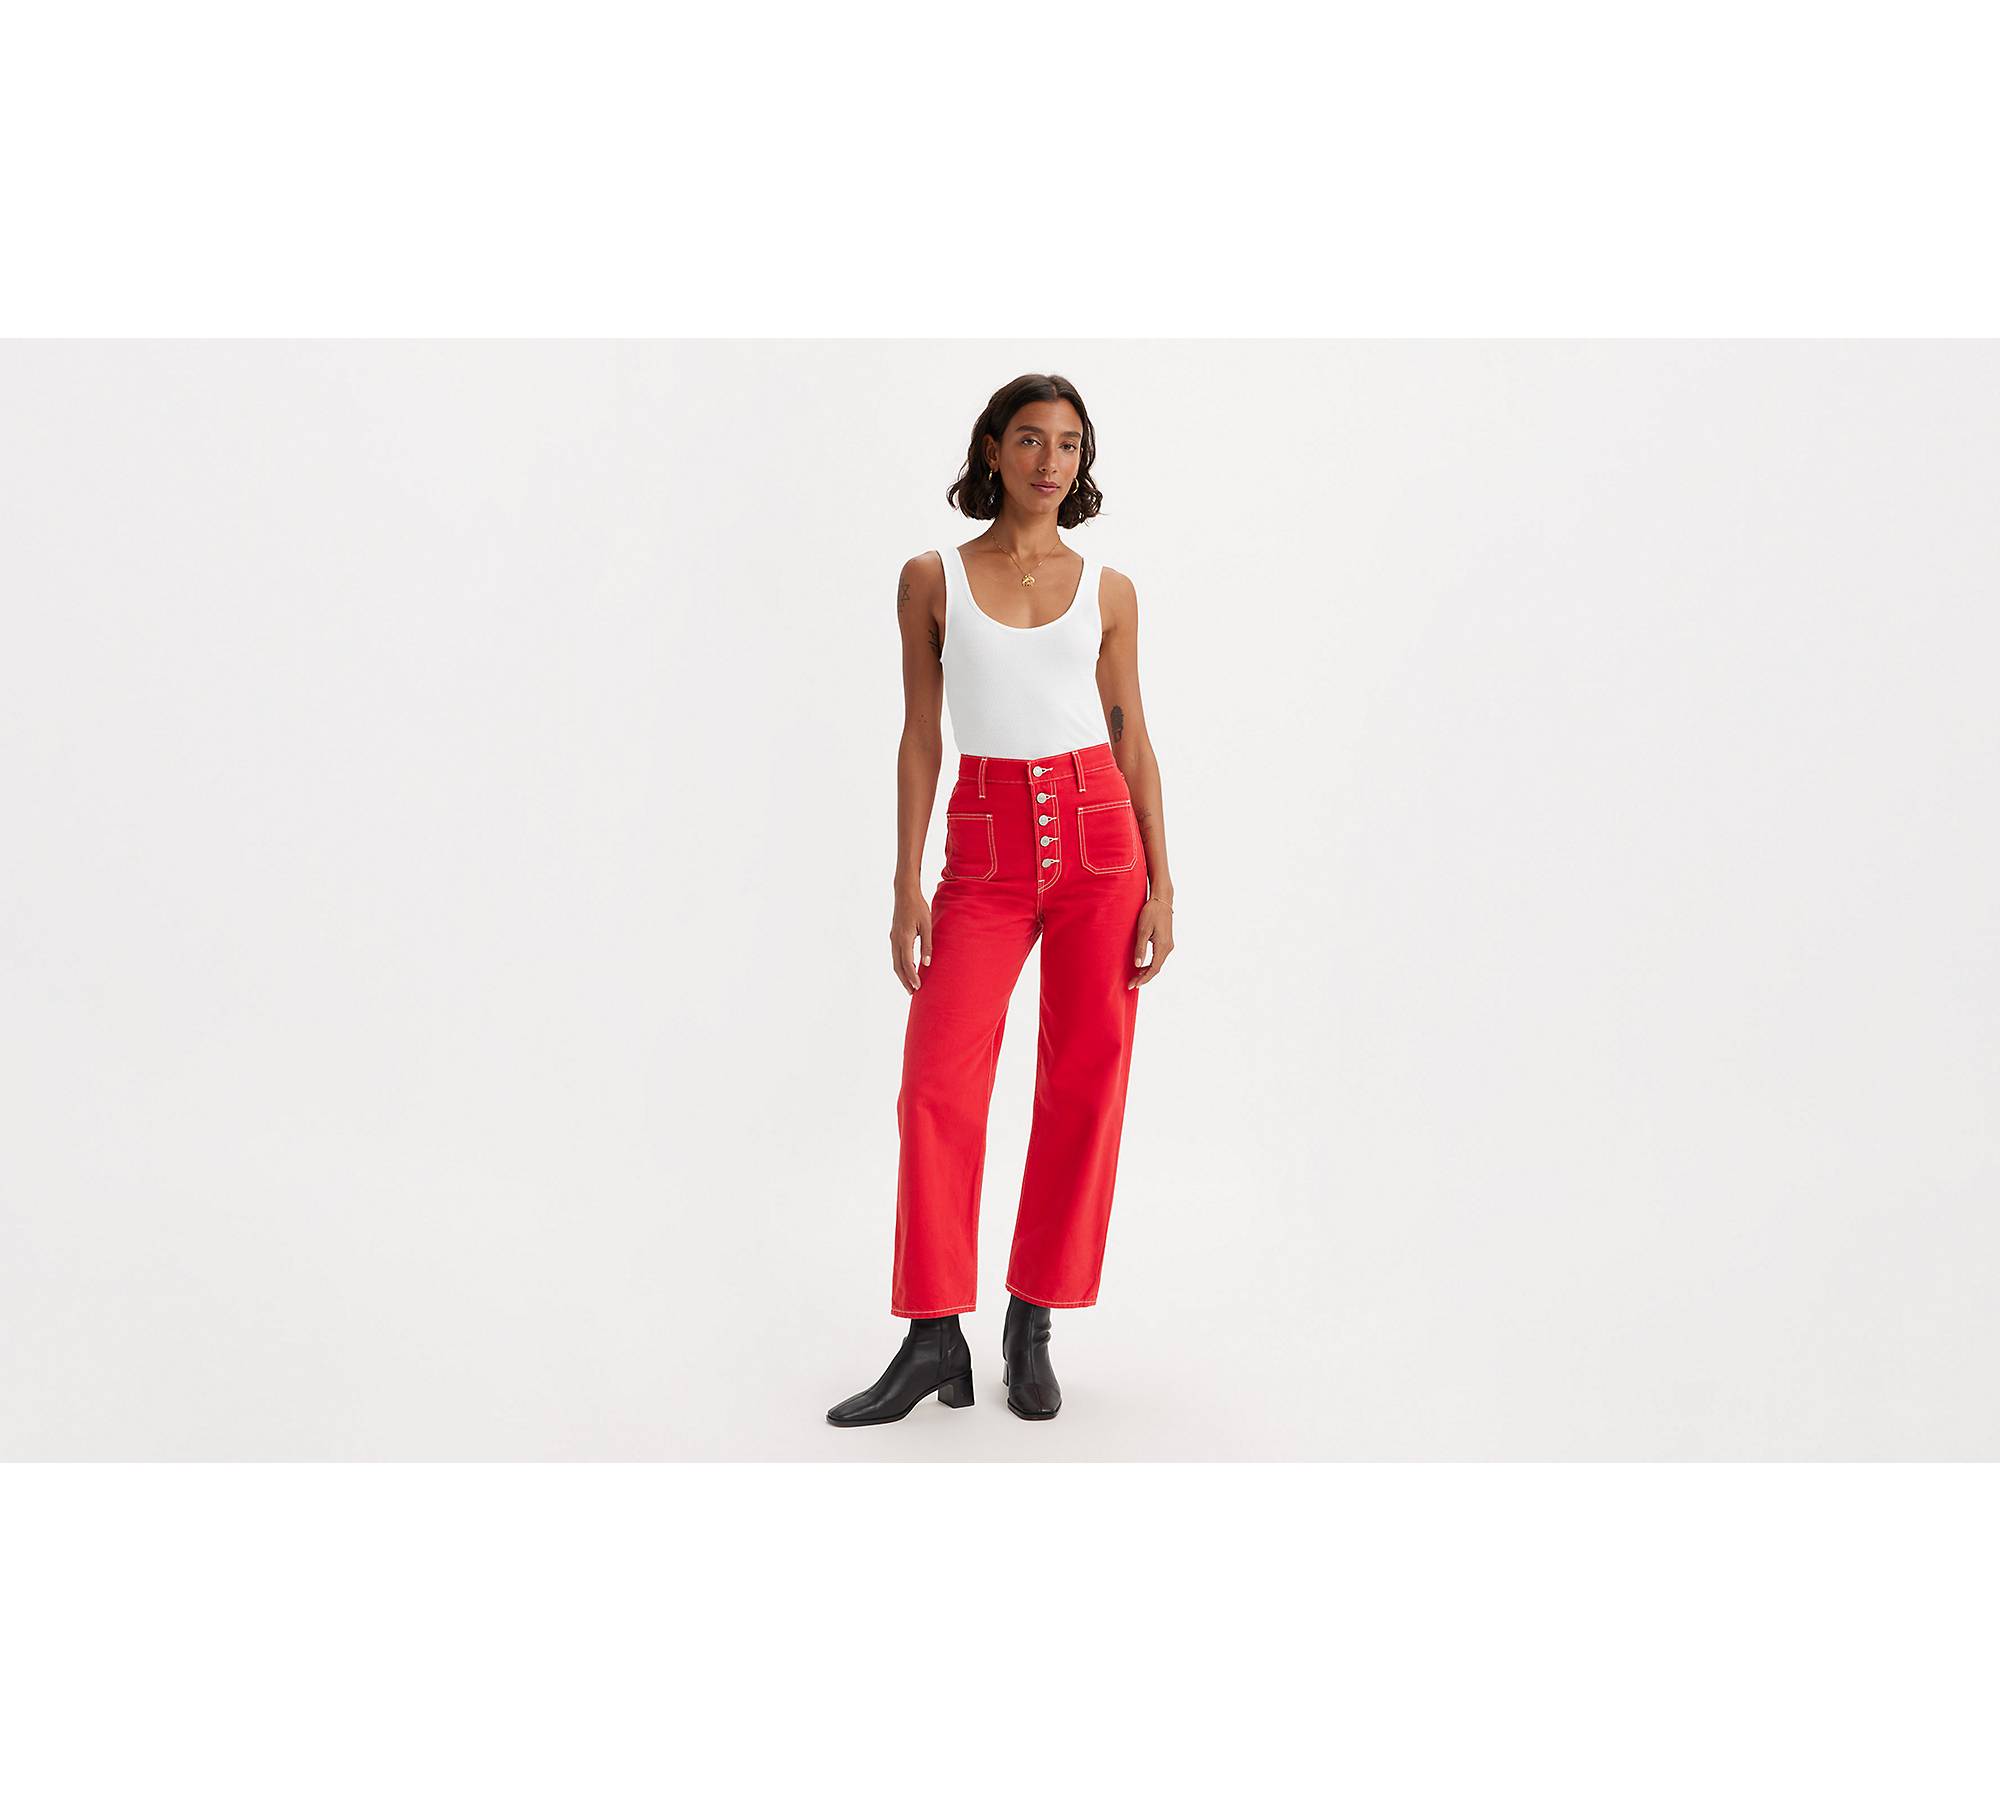 Ribcage Straight Patch Pocket Women's Jeans - Red | Levi's® US